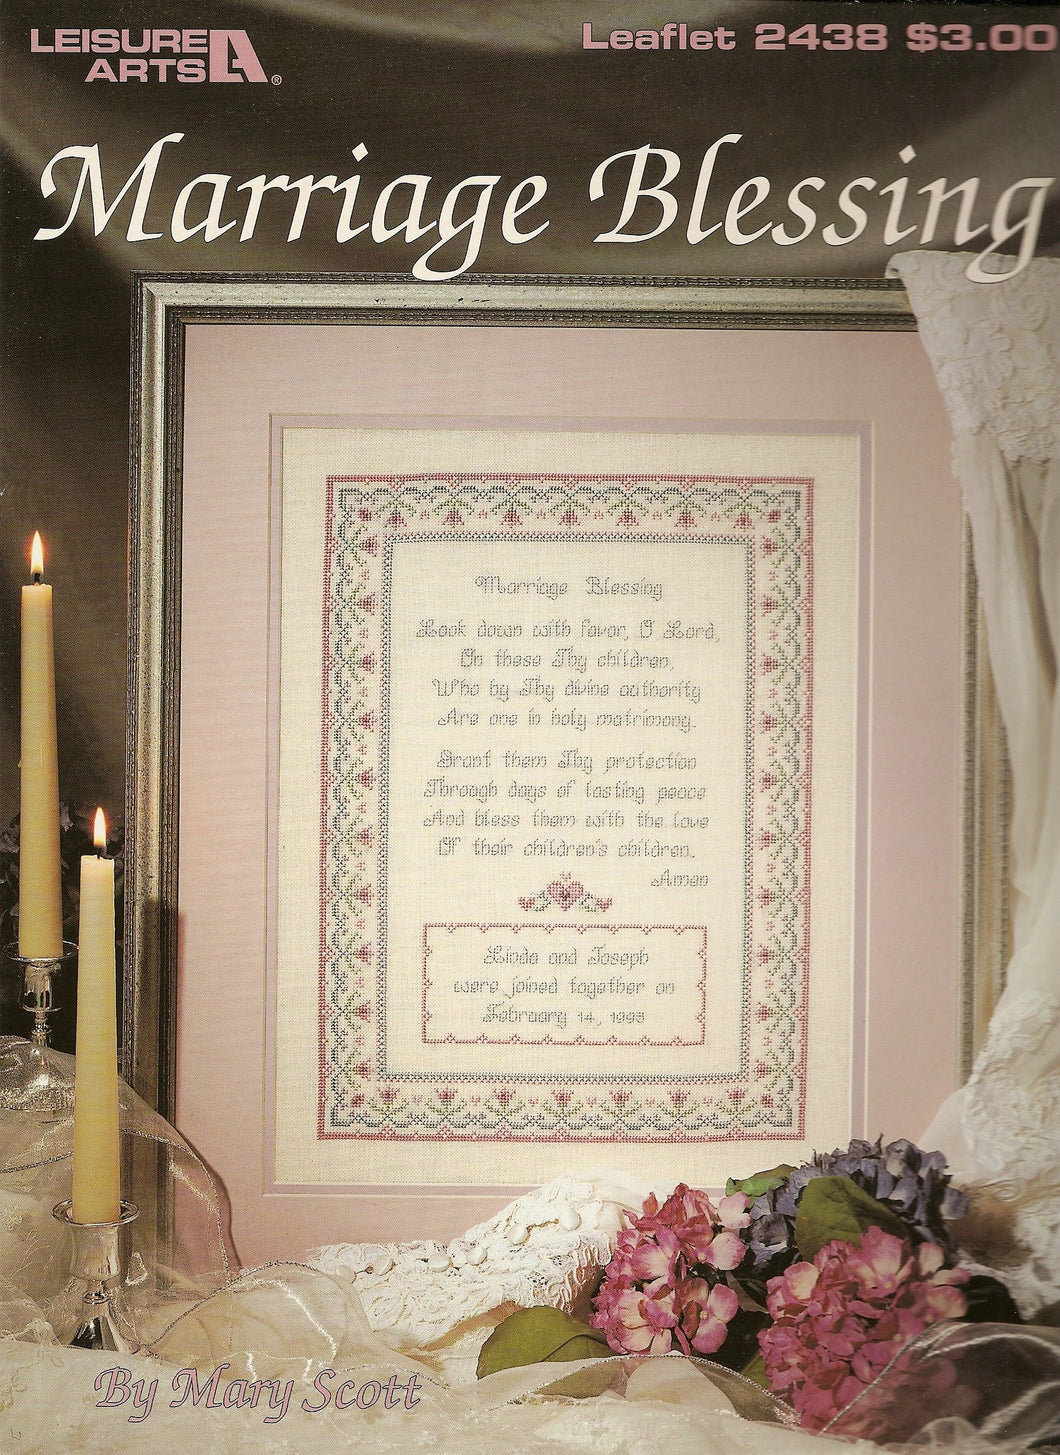 Marriage Blessing  Leaflet 2438